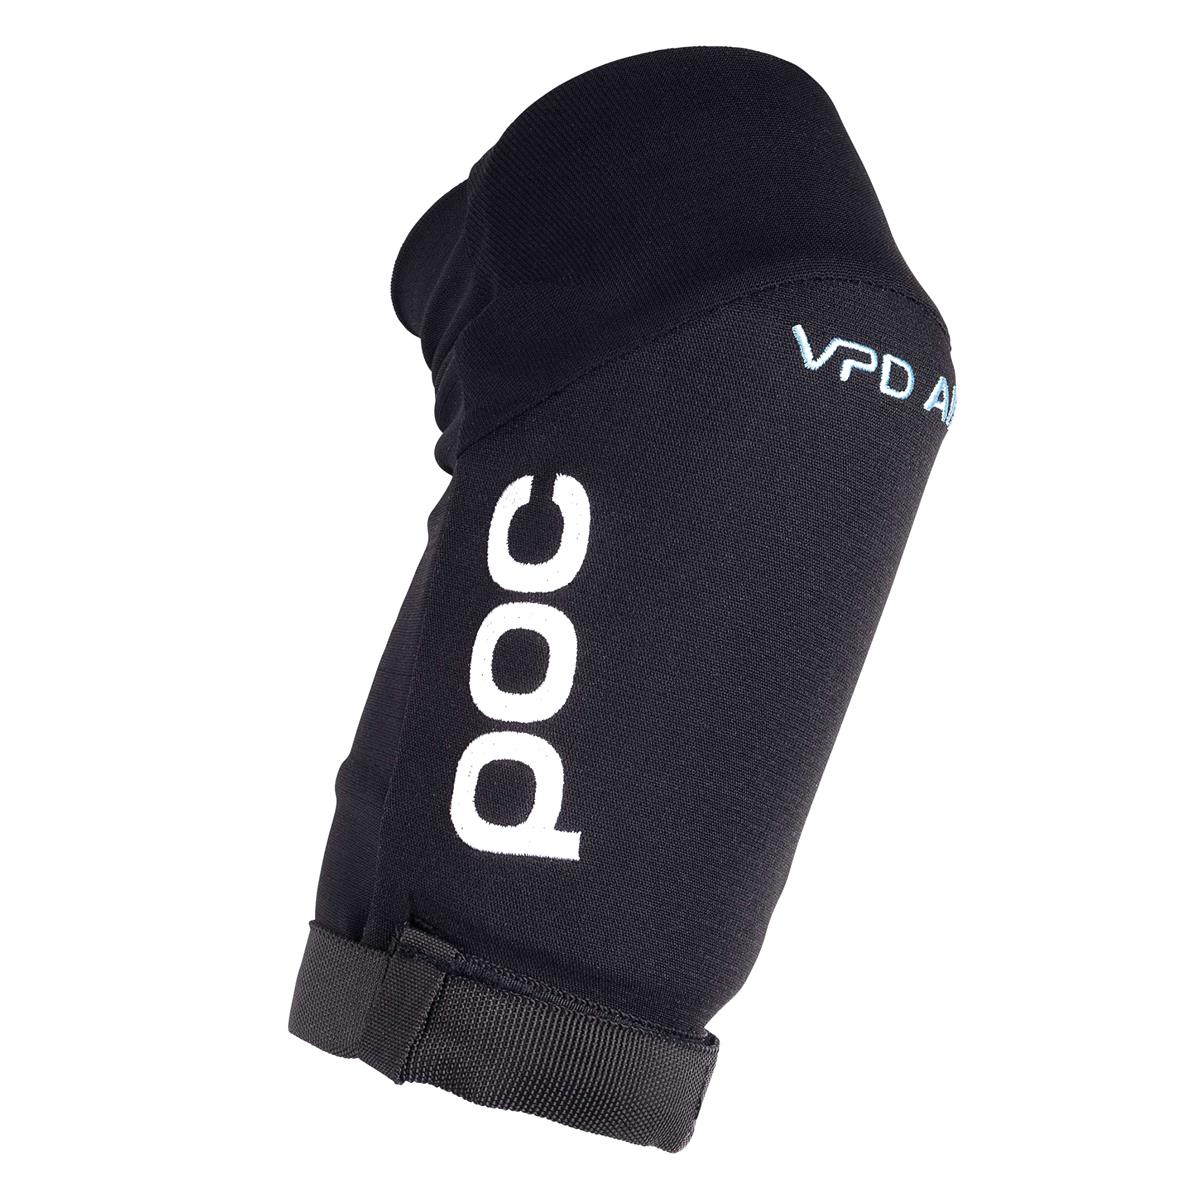 Joint VPD Air Elbow pads black size XS